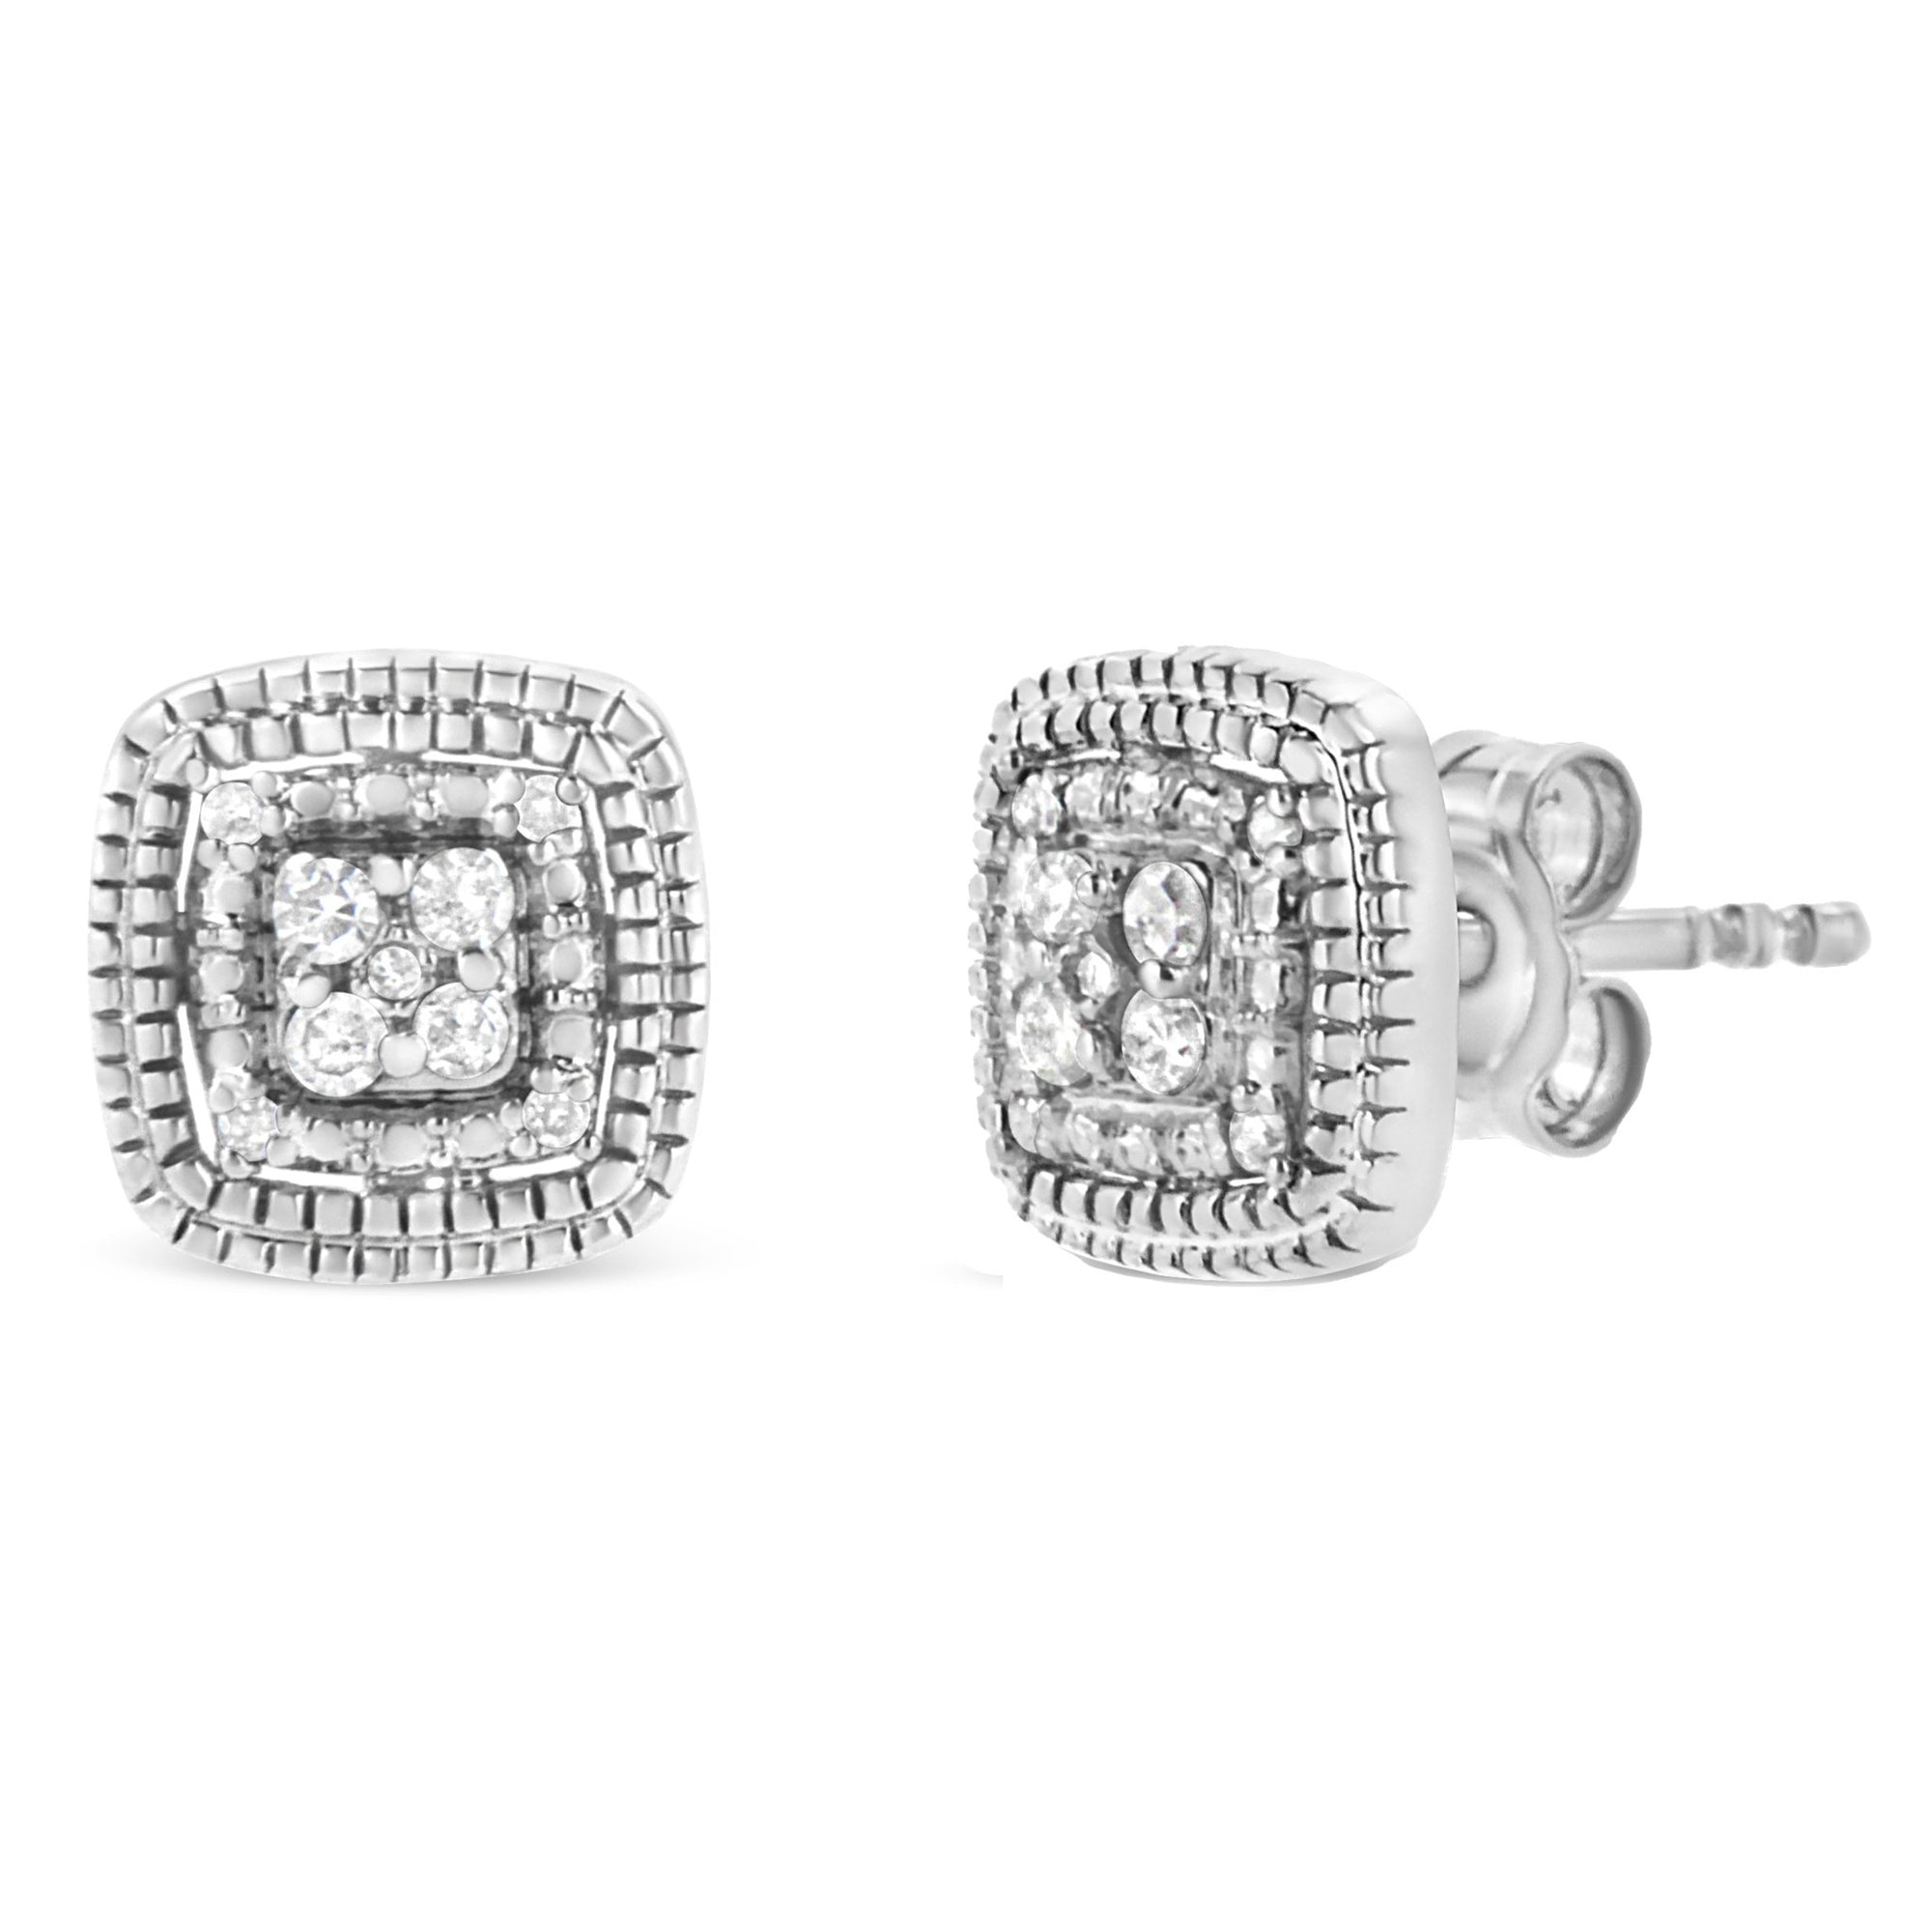 10K Yellow Gold Plated .925 Sterling Silver 1/10 Cttw Prong-Set Round Cut Diamond Square Shape with Milgrain Halo Stud Earrings (I-J Color, I2-I3 Clarity) - LinkagejewelrydesignLinkagejewelrydesign